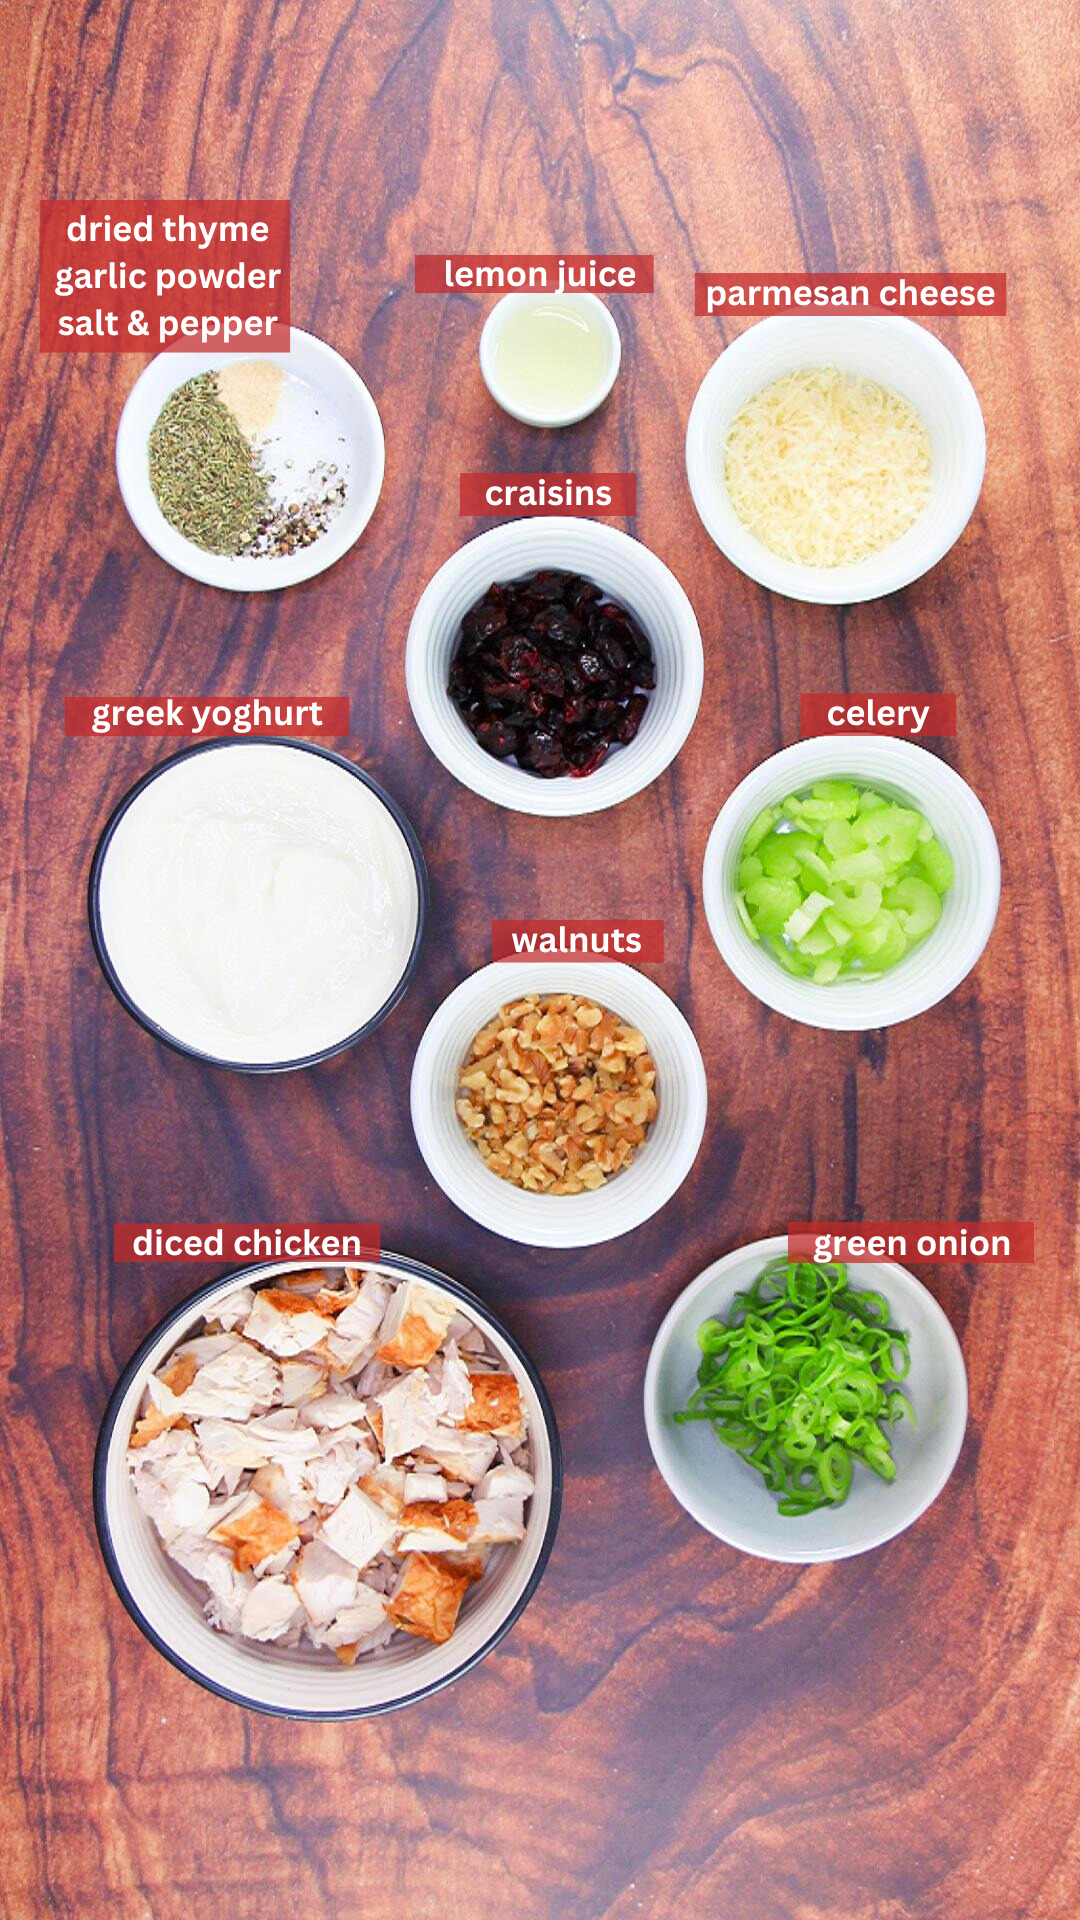 Top down view of bowls filled with the ingredients for chicken salad including chicken, celery, craisins, green onion, walnuts, greek yogurt, Parmesan cheese, lemon juice, thyme, garlic powder, salt, and pepper.